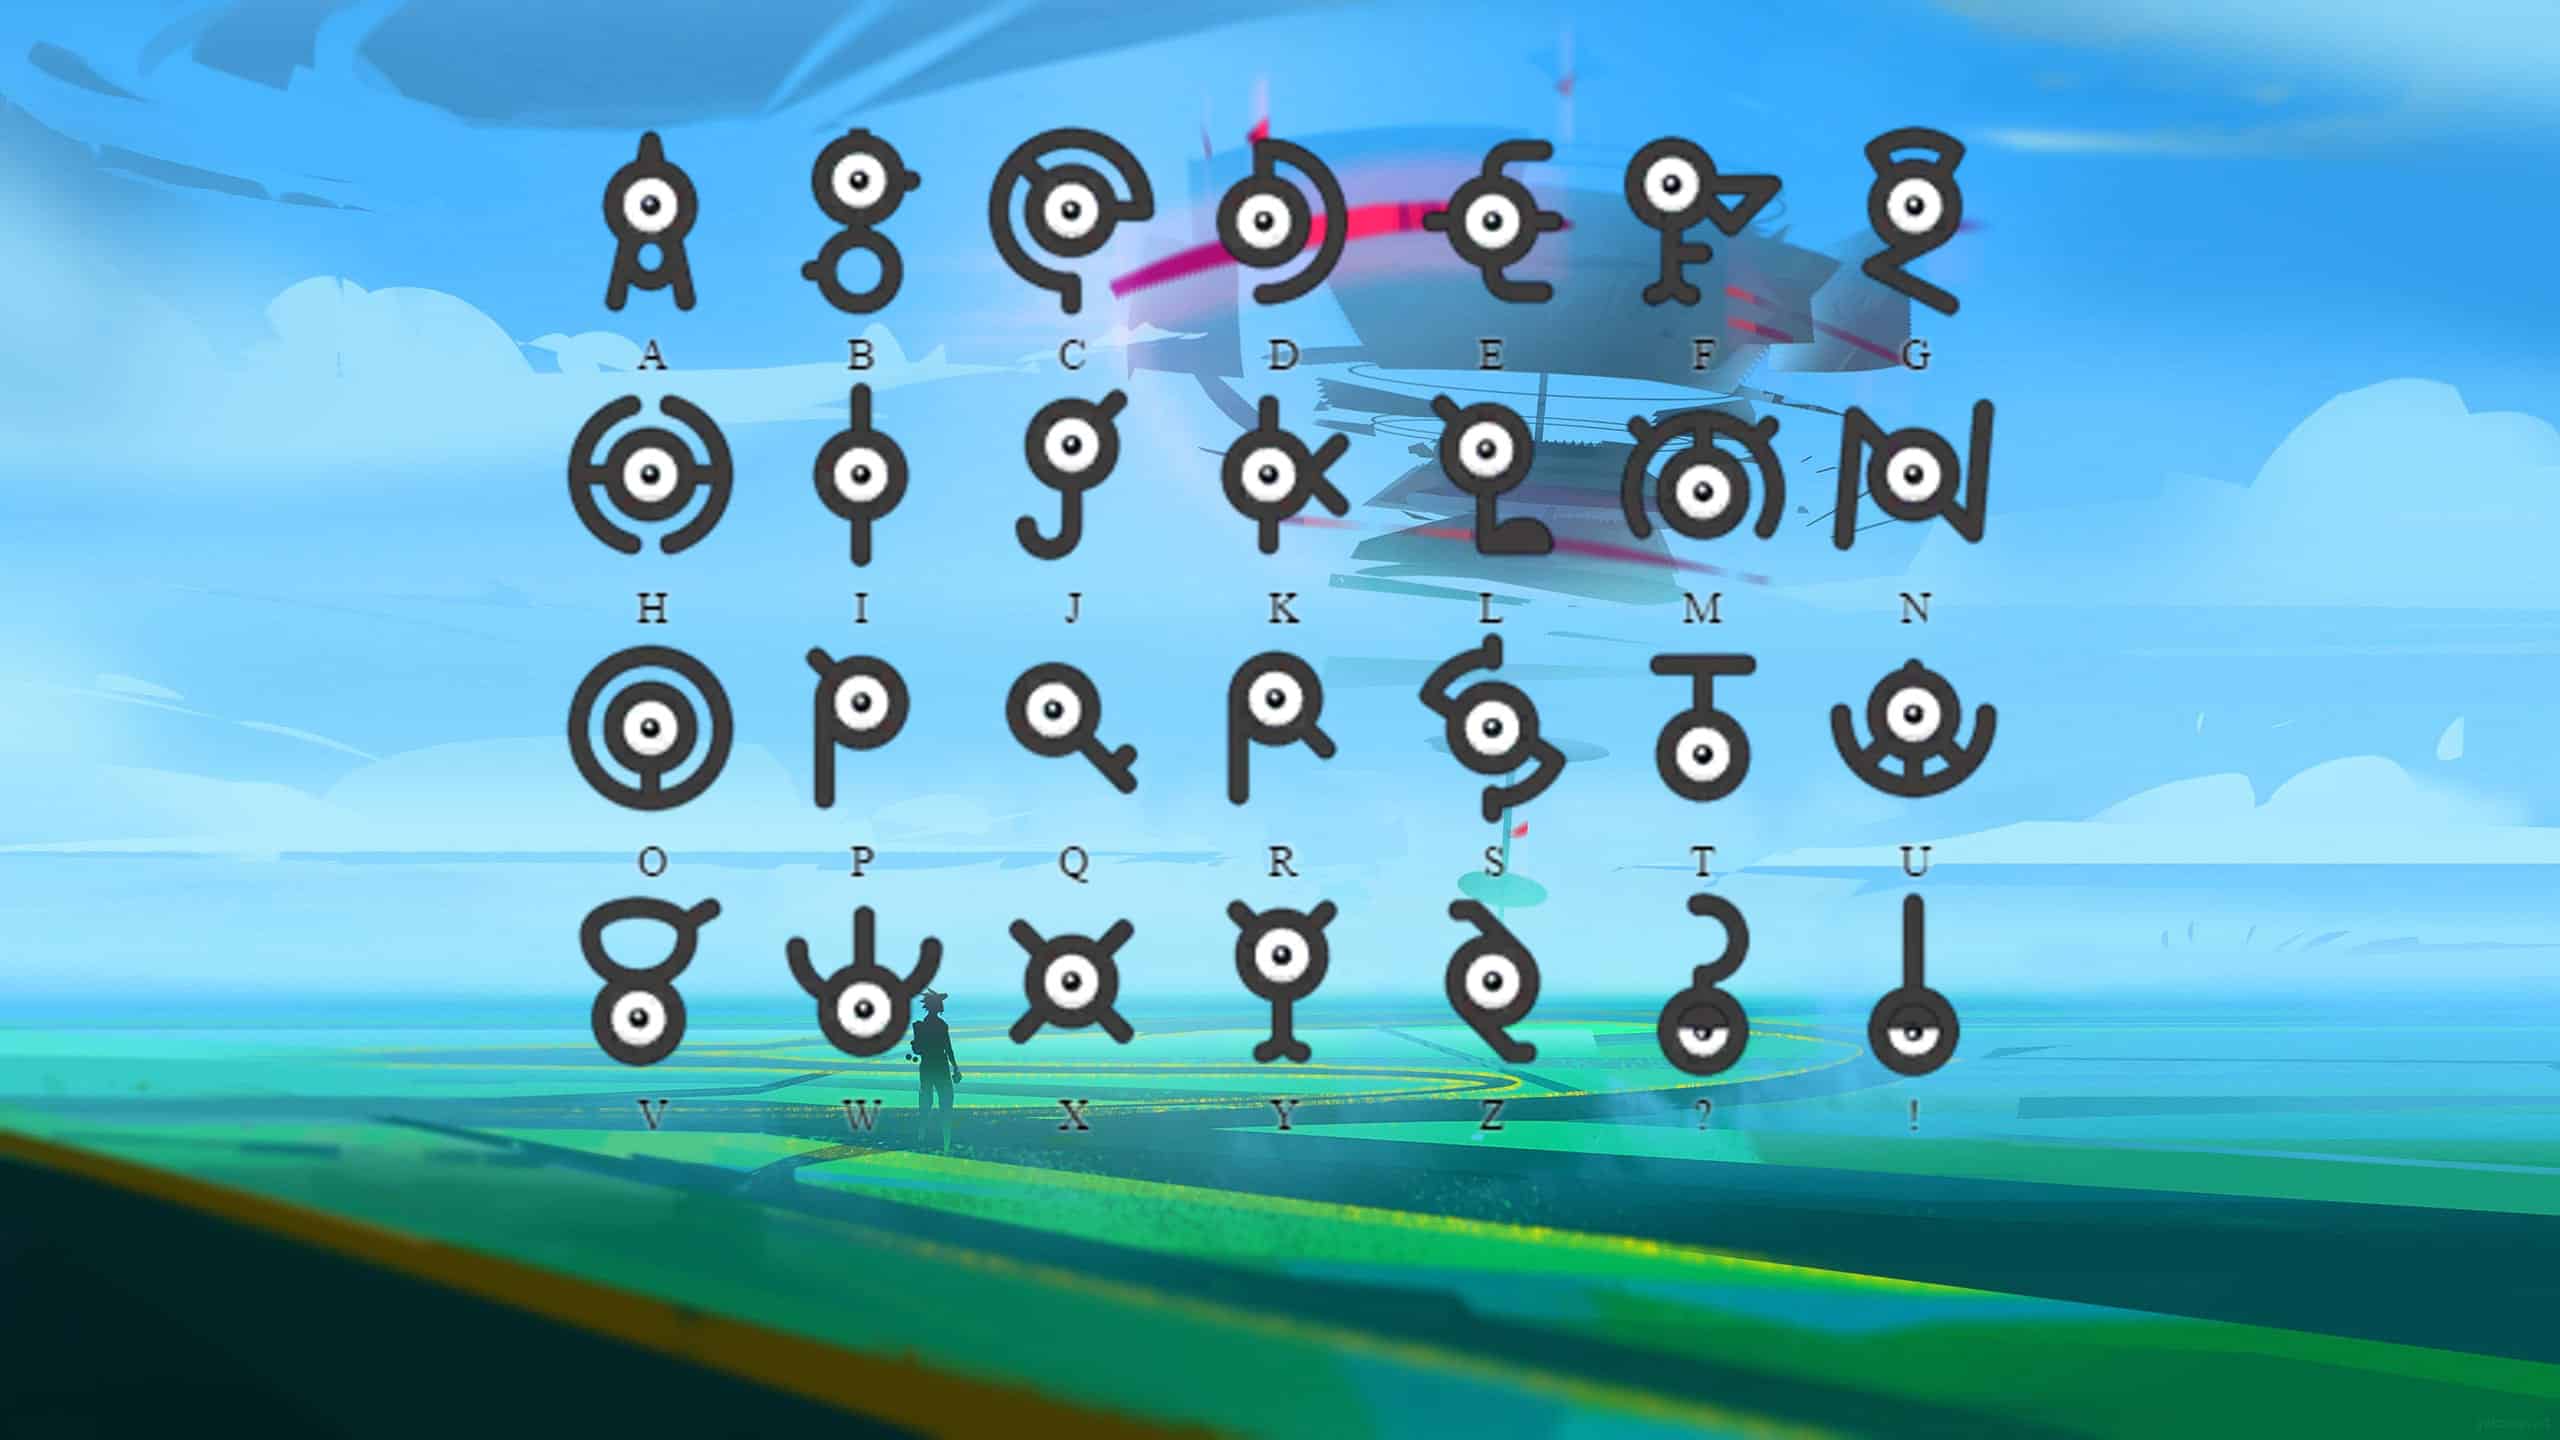 exclamation point Pokemon Go fly trade Unown 